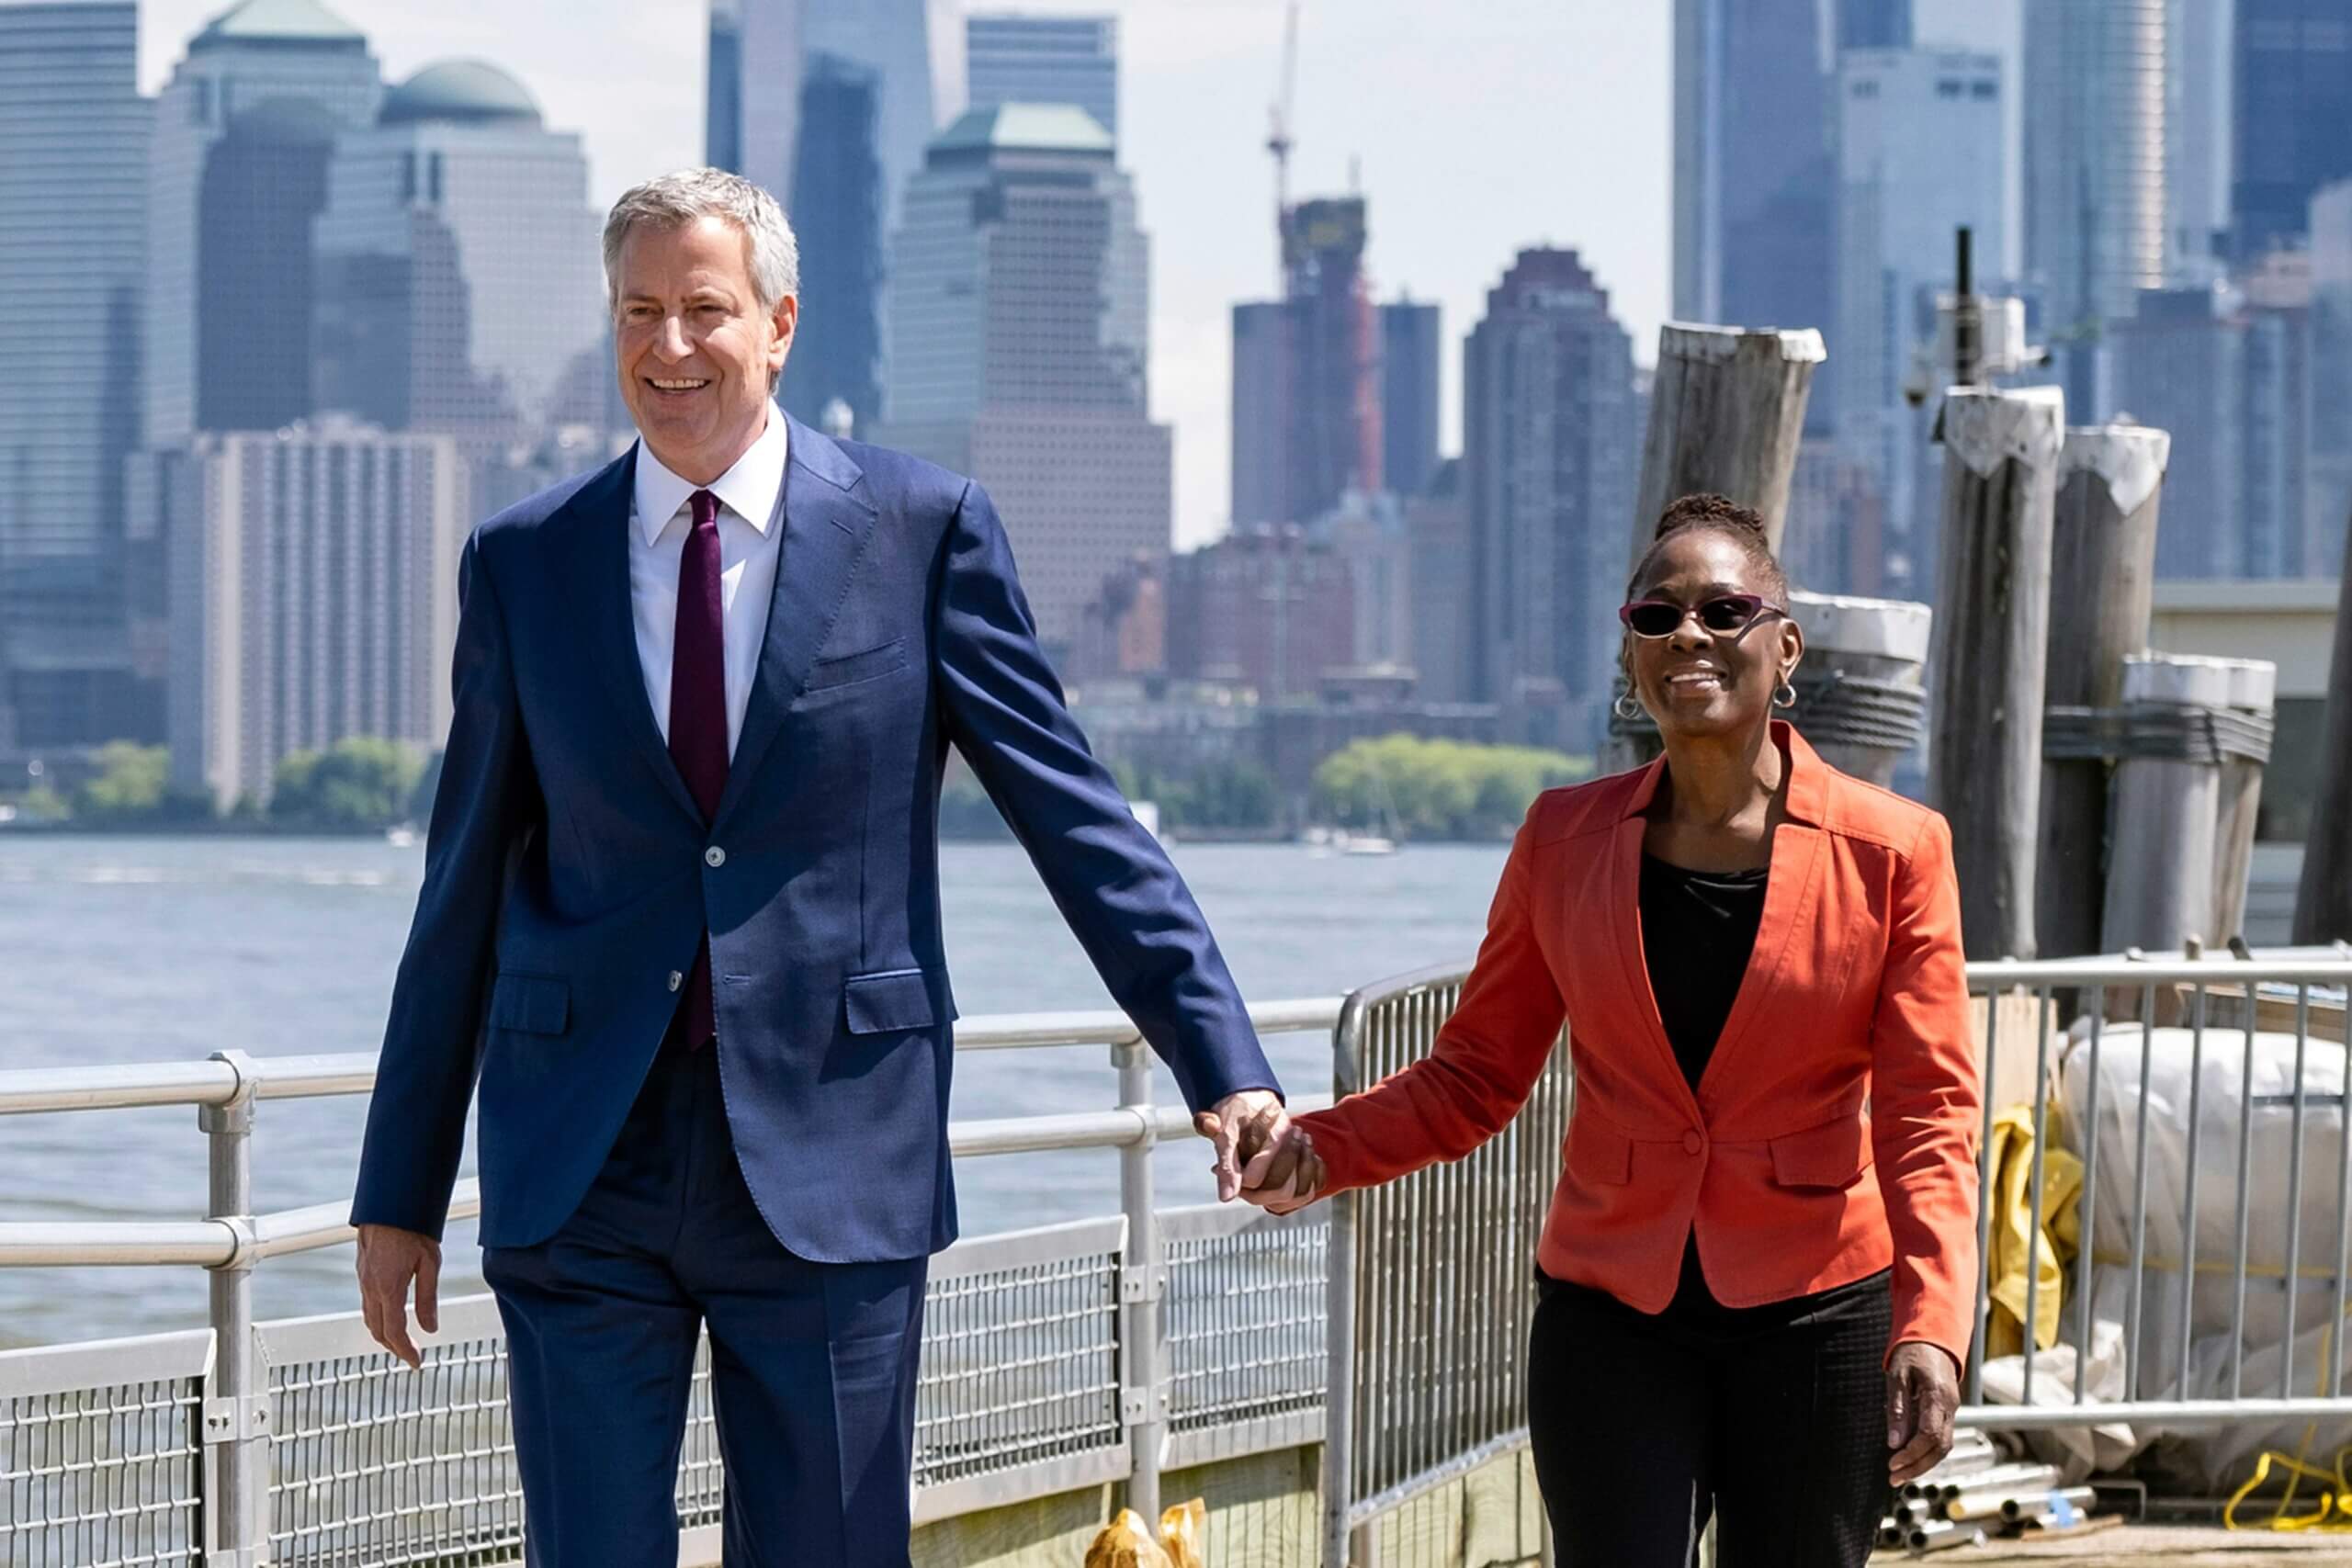 FILE - New York City Mayor Bill de Blasio and his wife Chirlane McCray arrive for the official dedication ceremony of the Statue of Liberty Museum on Liberty Island, May 16, 2019, in New York. Former New York CIty Mayor de Blasio and McCray are separating but not divorcing after 29 years of a marriage that helped lift de Blasio into the mayor's job. (AP Photo/Craig Ruttle, File)